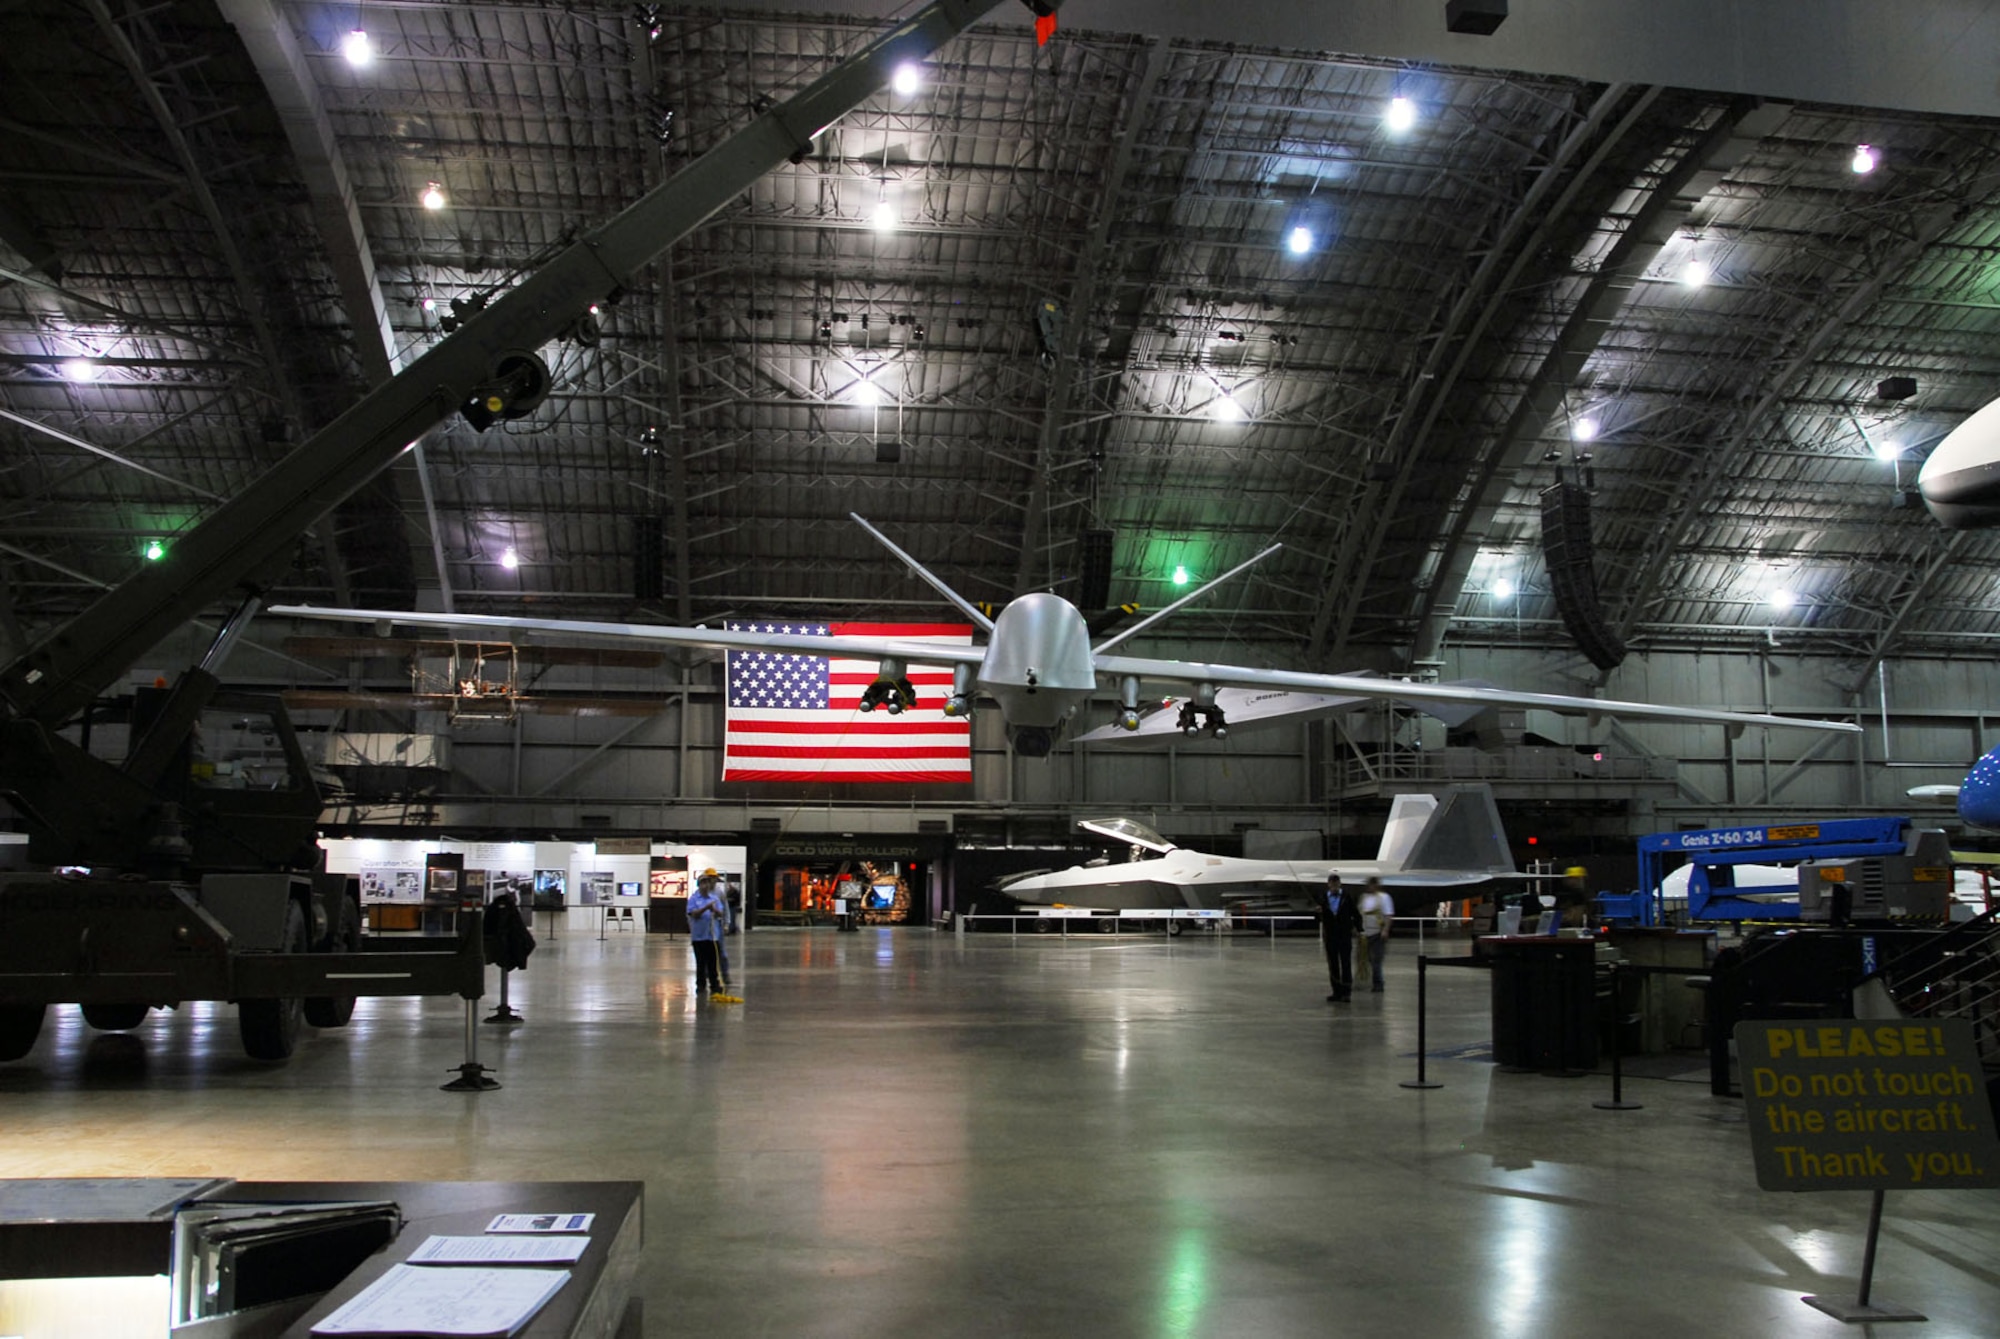 DAYTON, Ohio (01/2010) -- Restoration crews prepare to suspend the YMQ-9 Reaper from the ceiling at the National Museum of the U.S. Air Force. (U.S. Air Force photo)